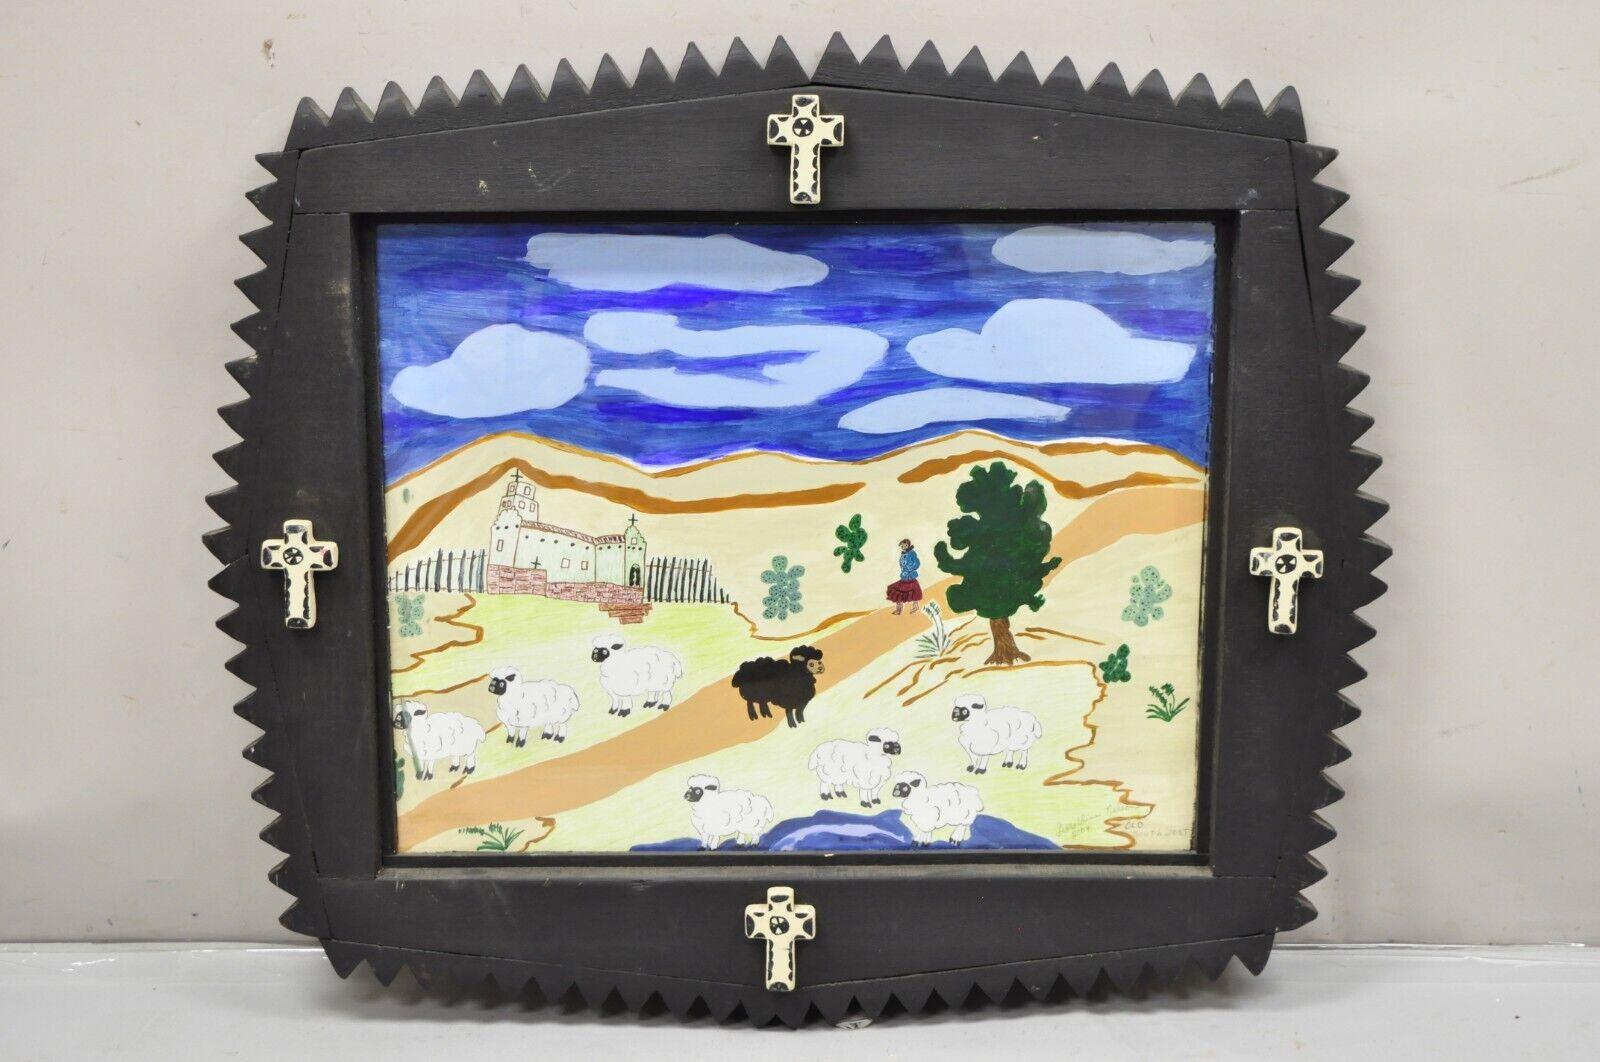 Vintage Geraldine Nelson “Old Southwest” Painting Carved Wood Frame with Crosses. Item features a very nice thick carved wood frame with crosses, believed to be acrylic paint on board, scene includes a church, black sheep, white sheep, lady waking